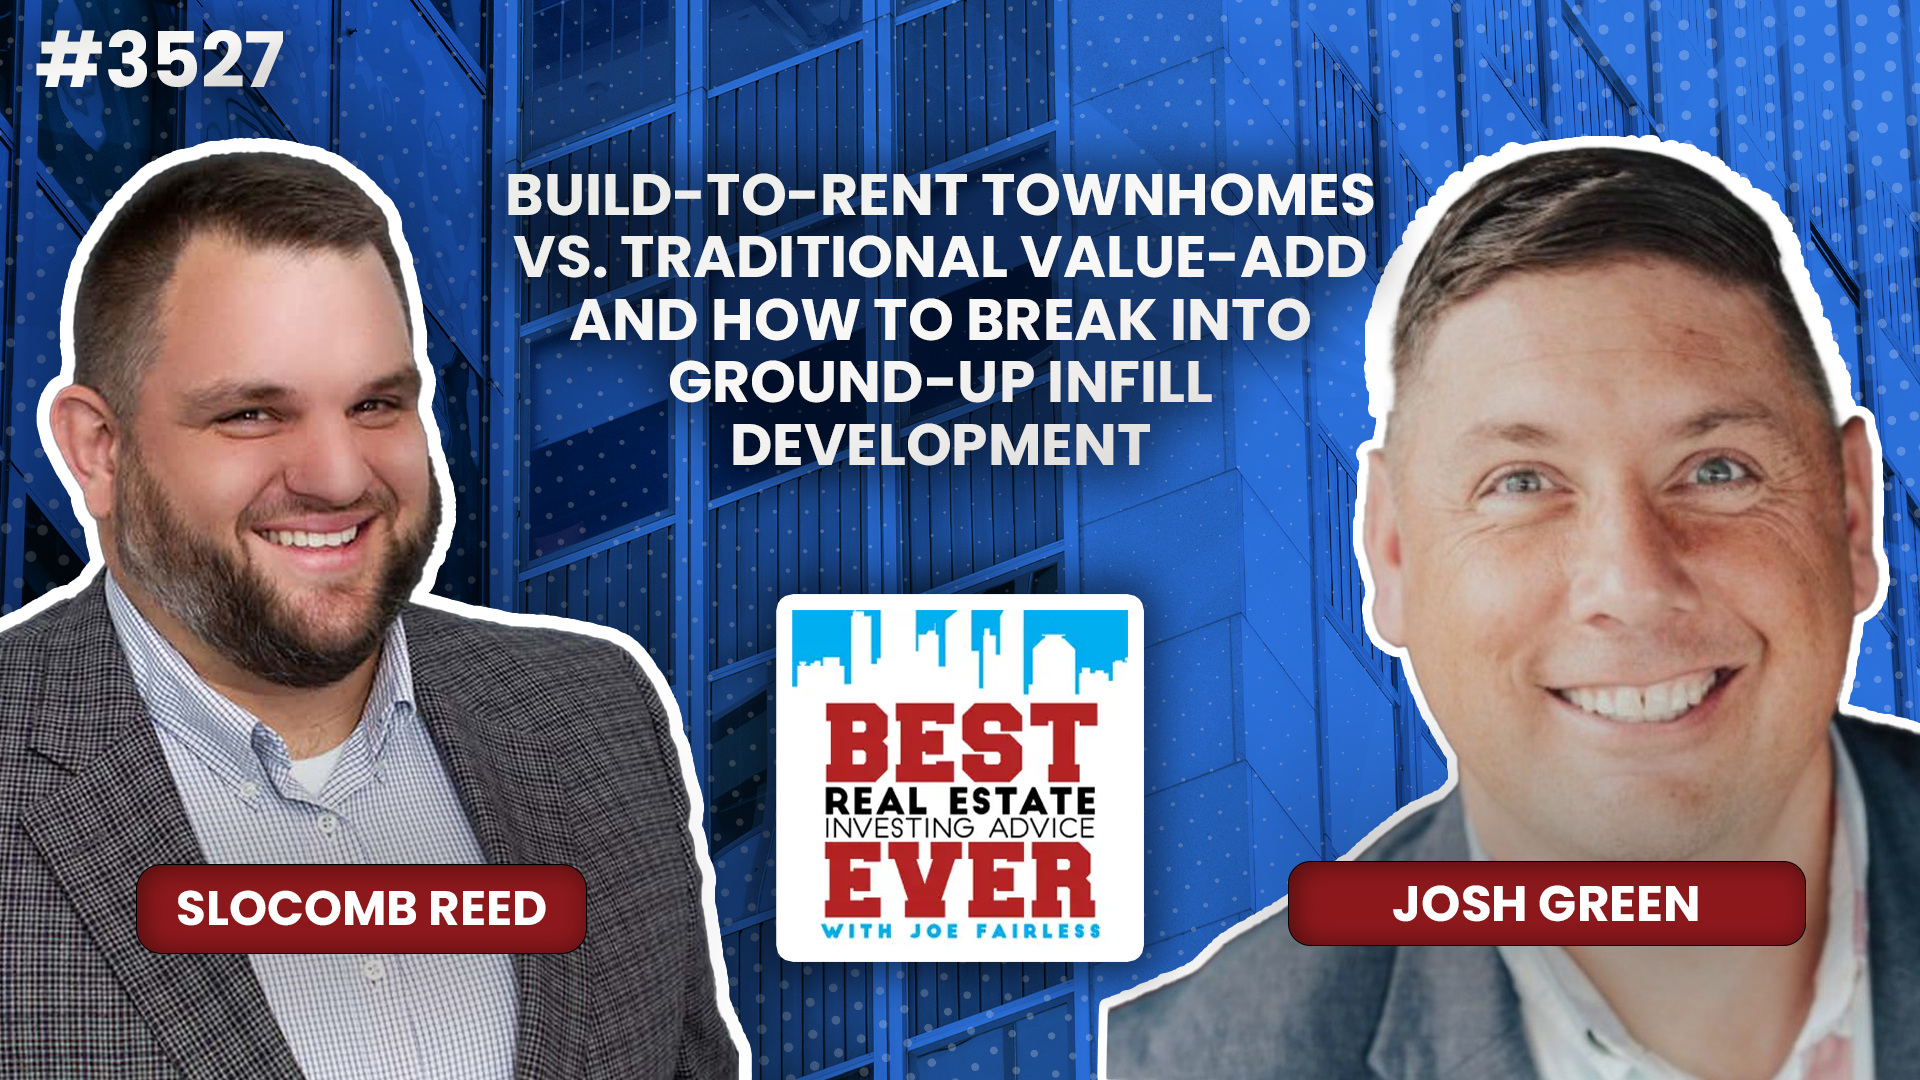 JF3527: Build-to-Rent Townhomes vs. Traditional Value-add and How to Break Into Ground-Up Infill Development ft. Josh Green